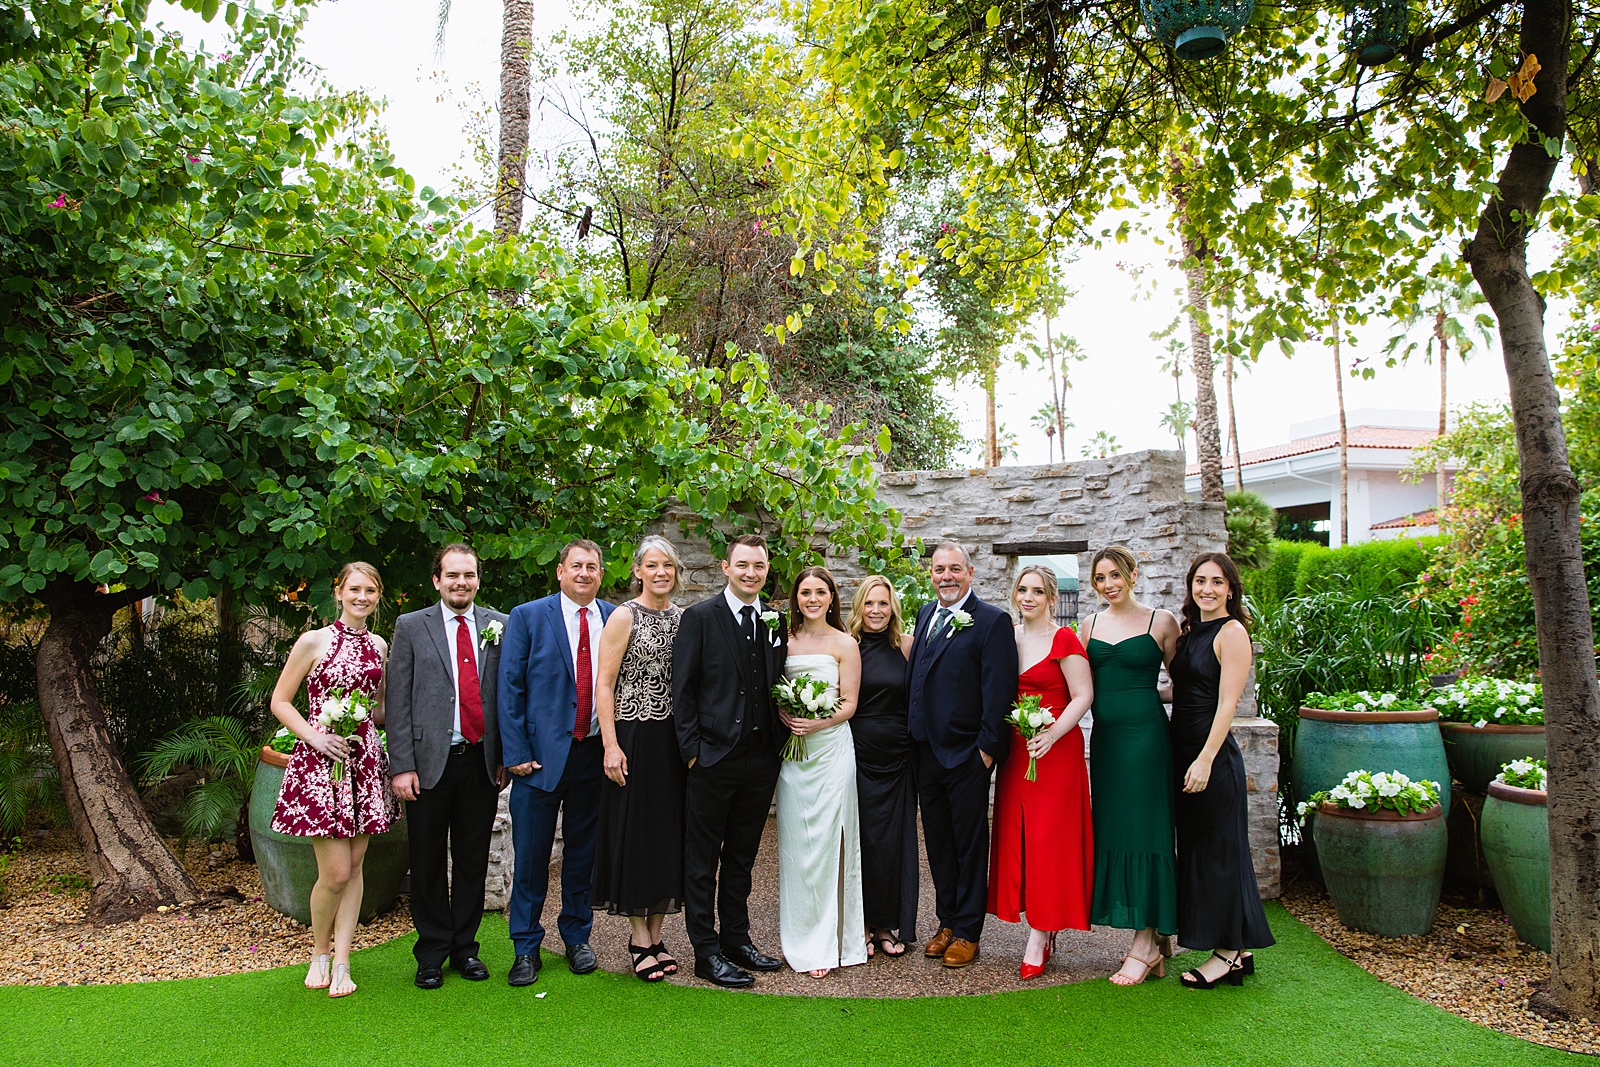 Bride & Groom with guests during their The Scott wedding by Arizona wedding photographer PMA Photography.